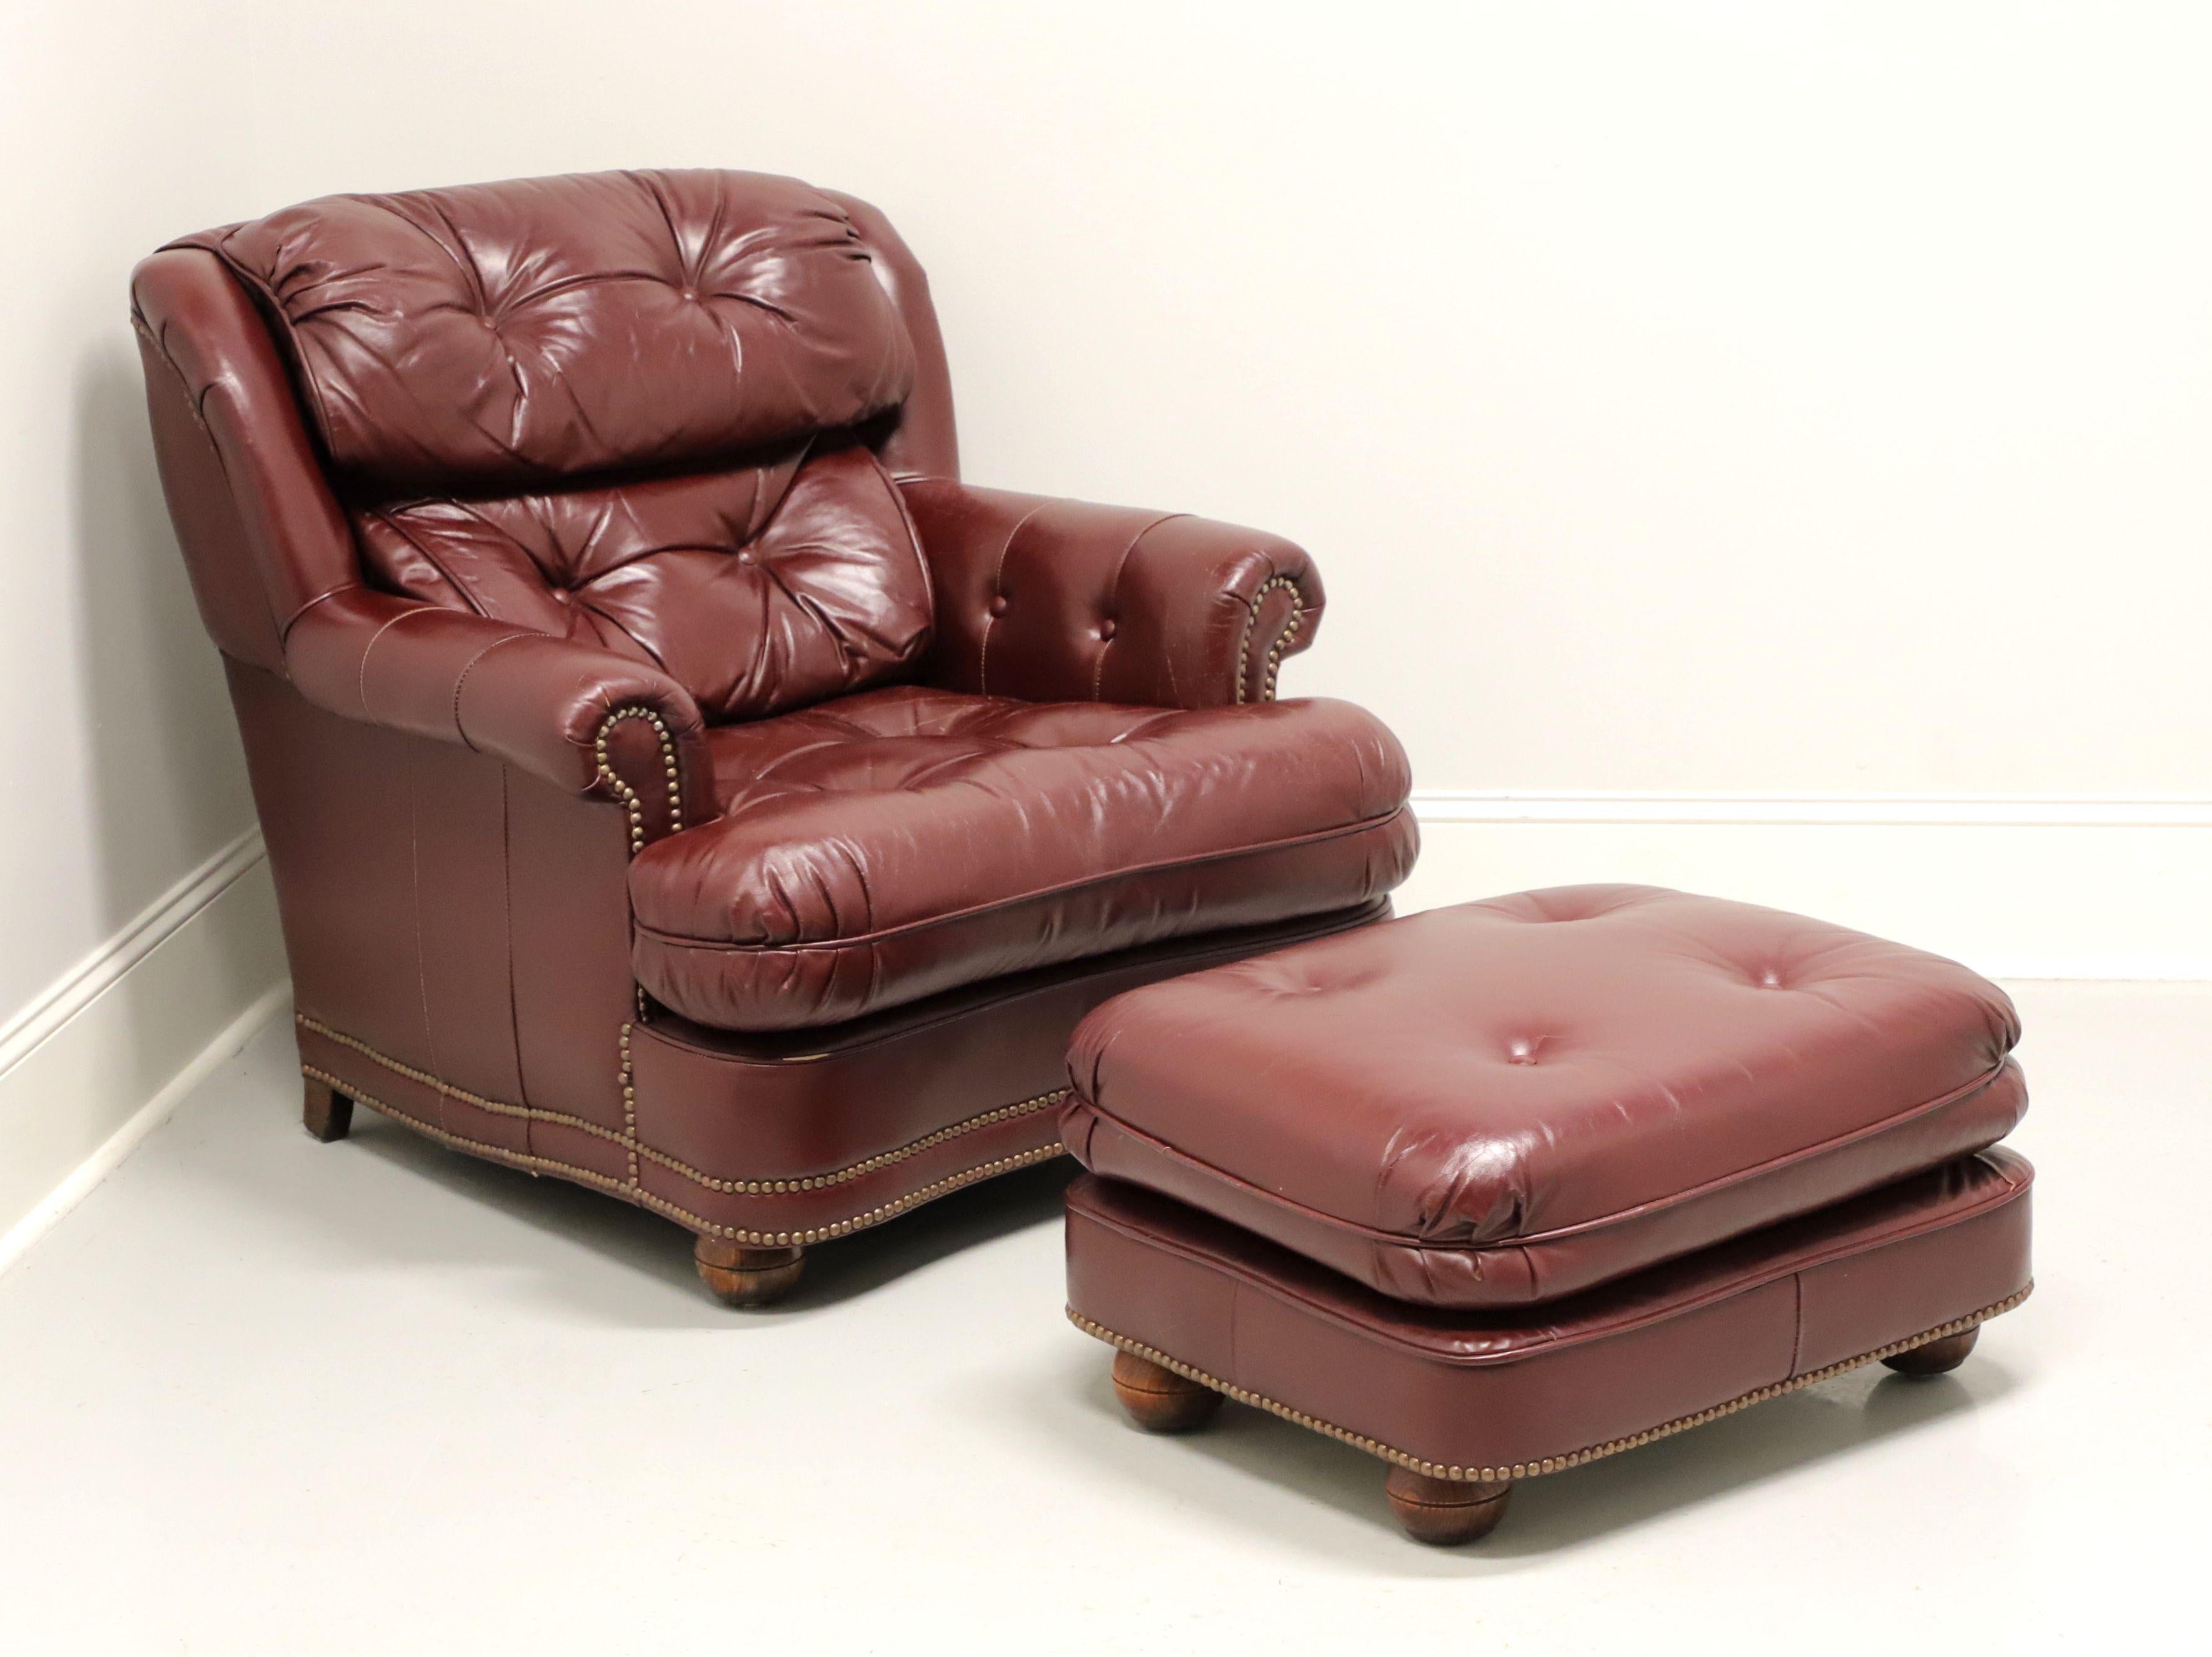 CLASSIC LEATHER Top Grain Burgundy Leather Tufted Lounge Armchair with Ottoman 5